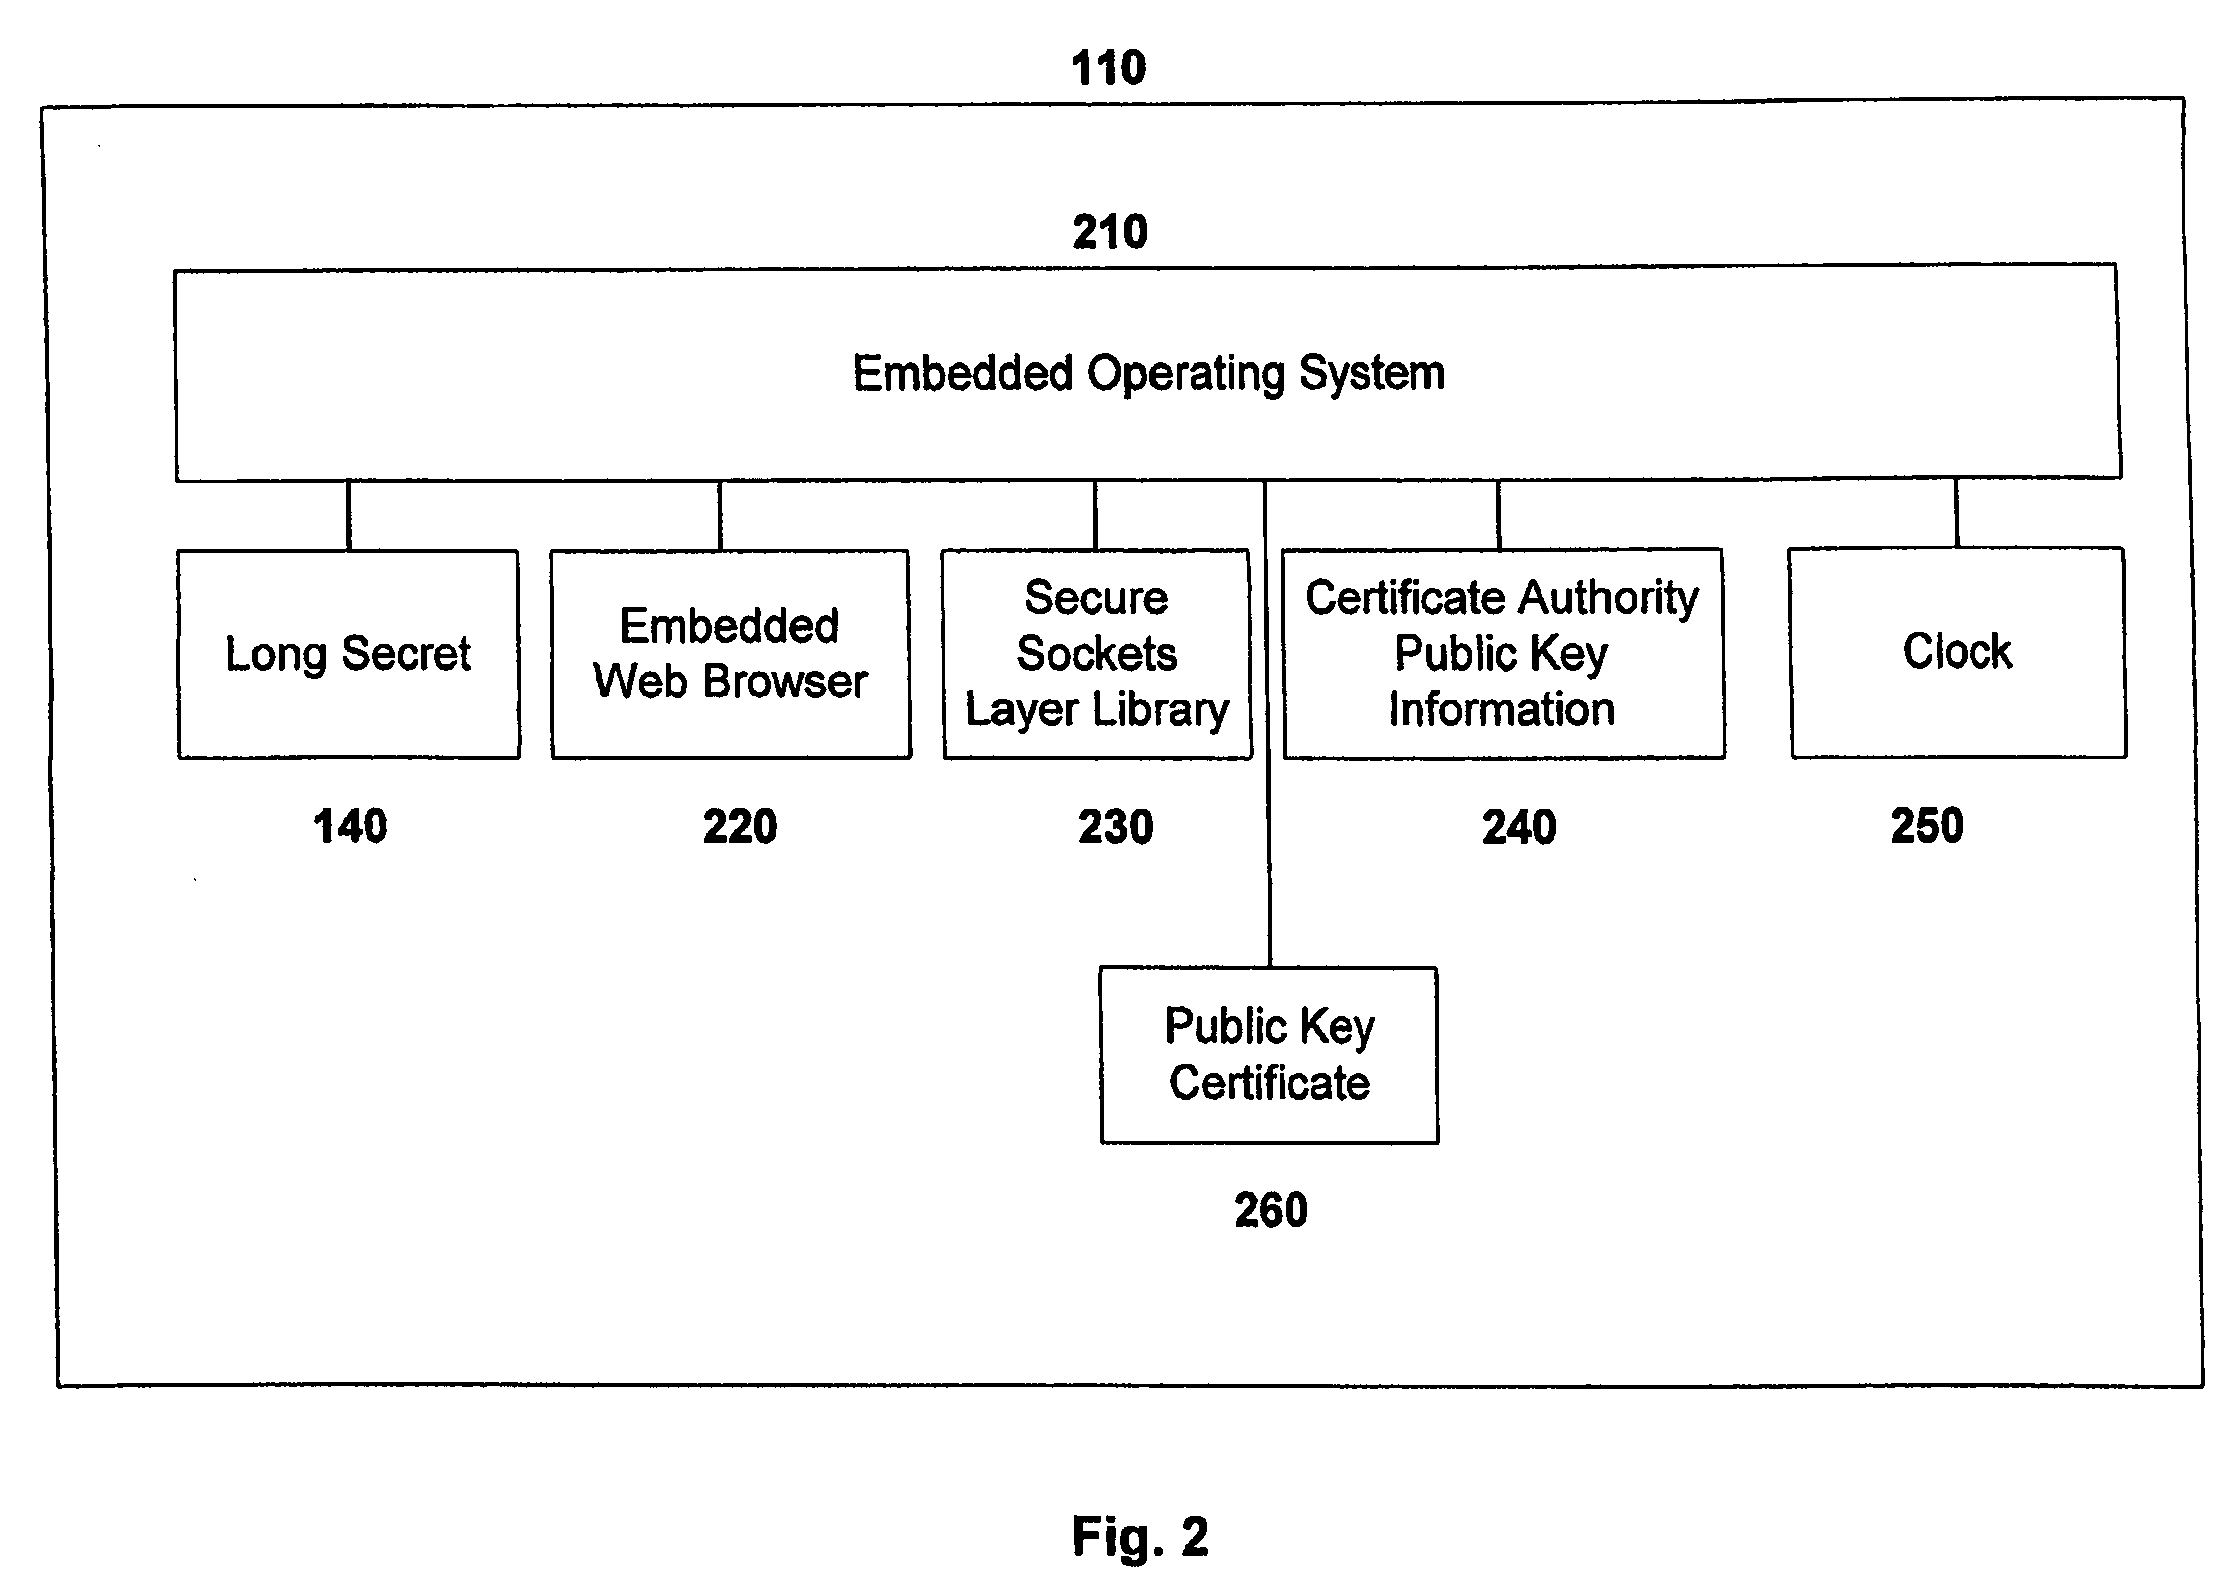 Apparatus, system, and method for authenticating users of digital communication devices